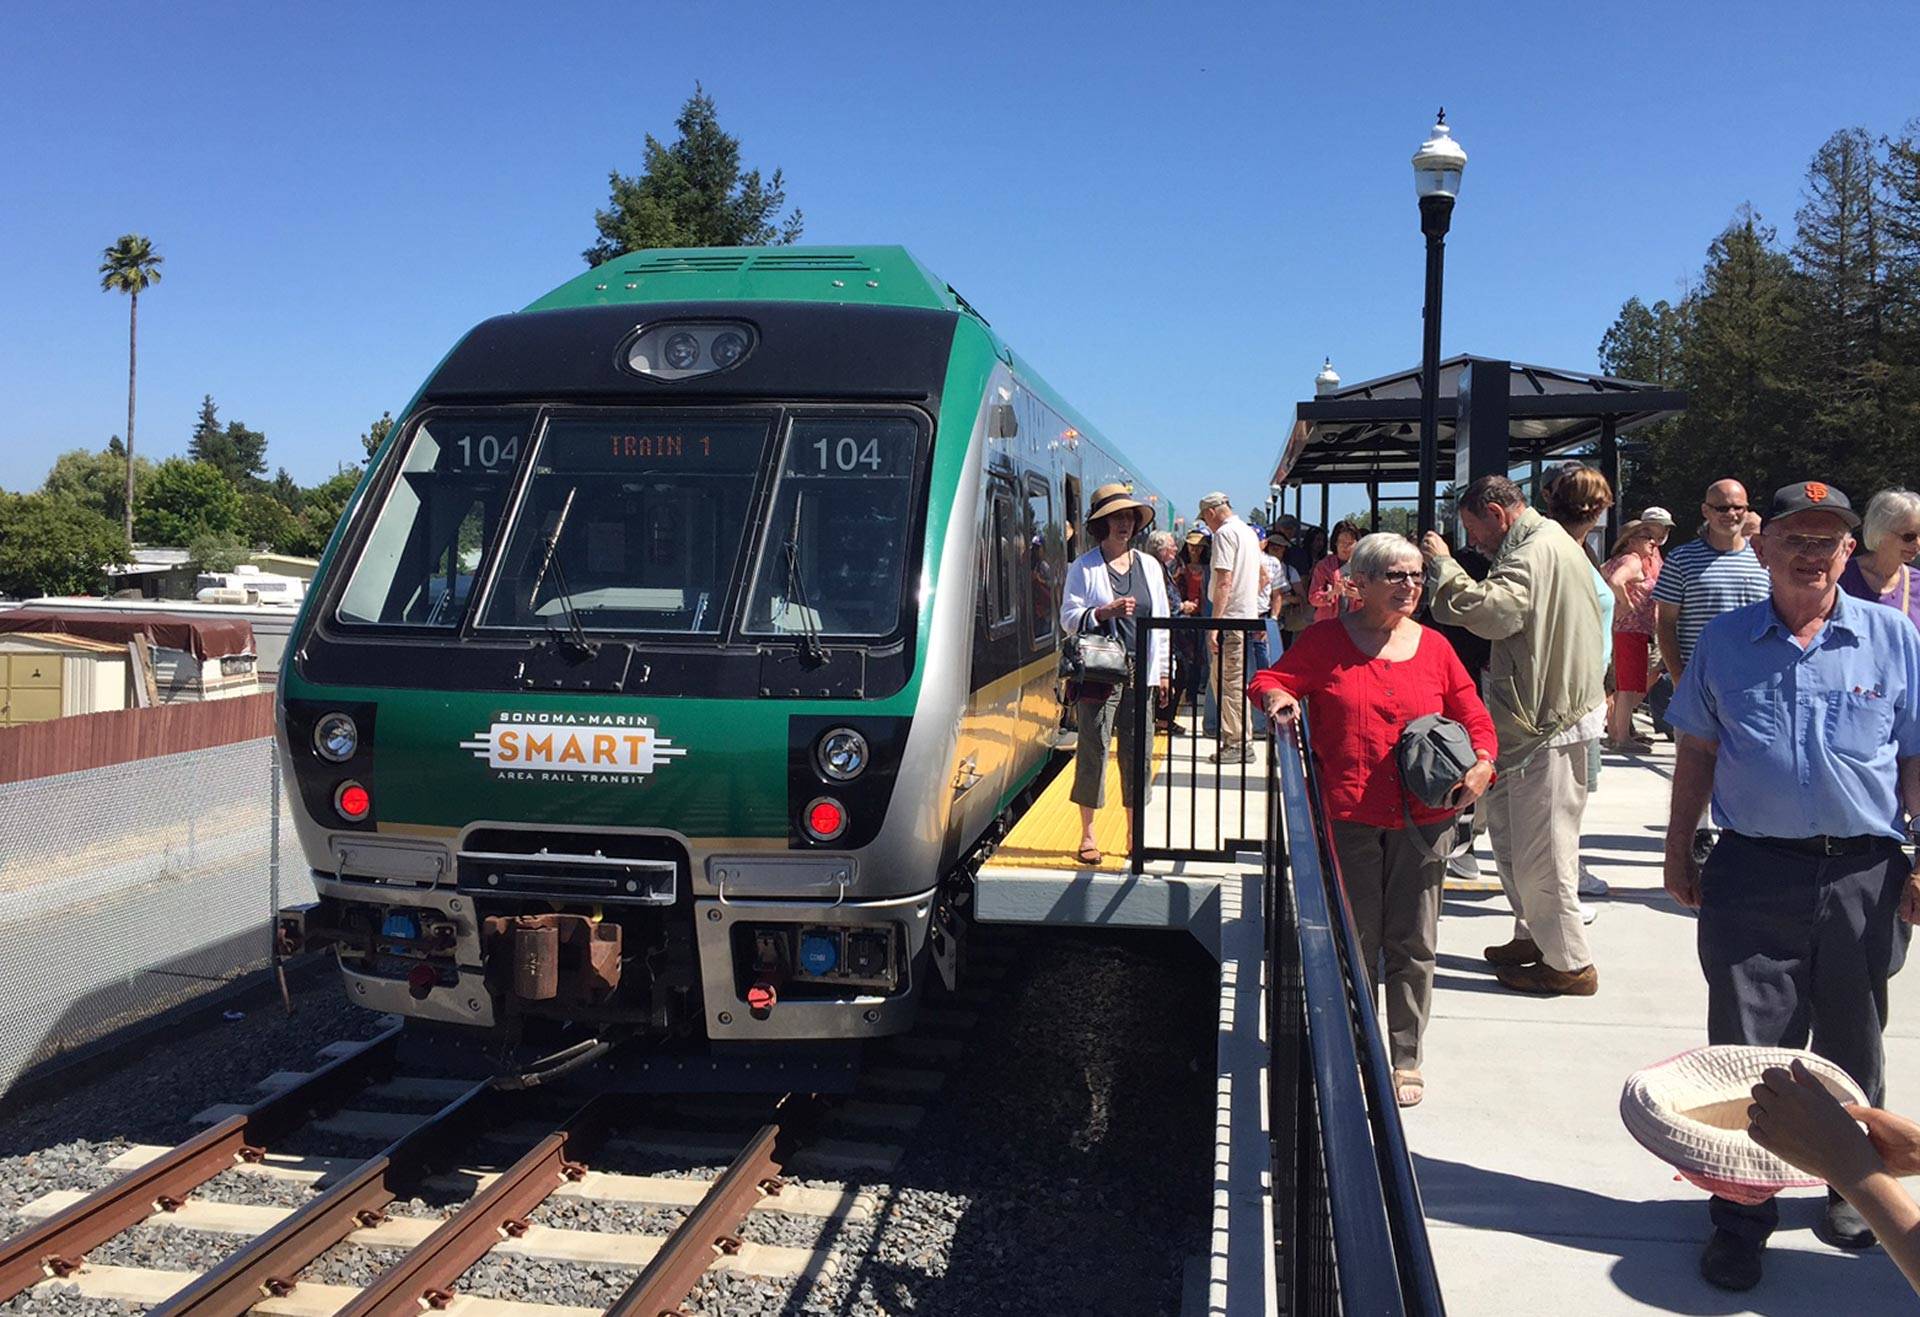 A SMART train awaits departure at the Rohnert Park station for a preview ride on June 29, 2017. Gabe Meline/KQED